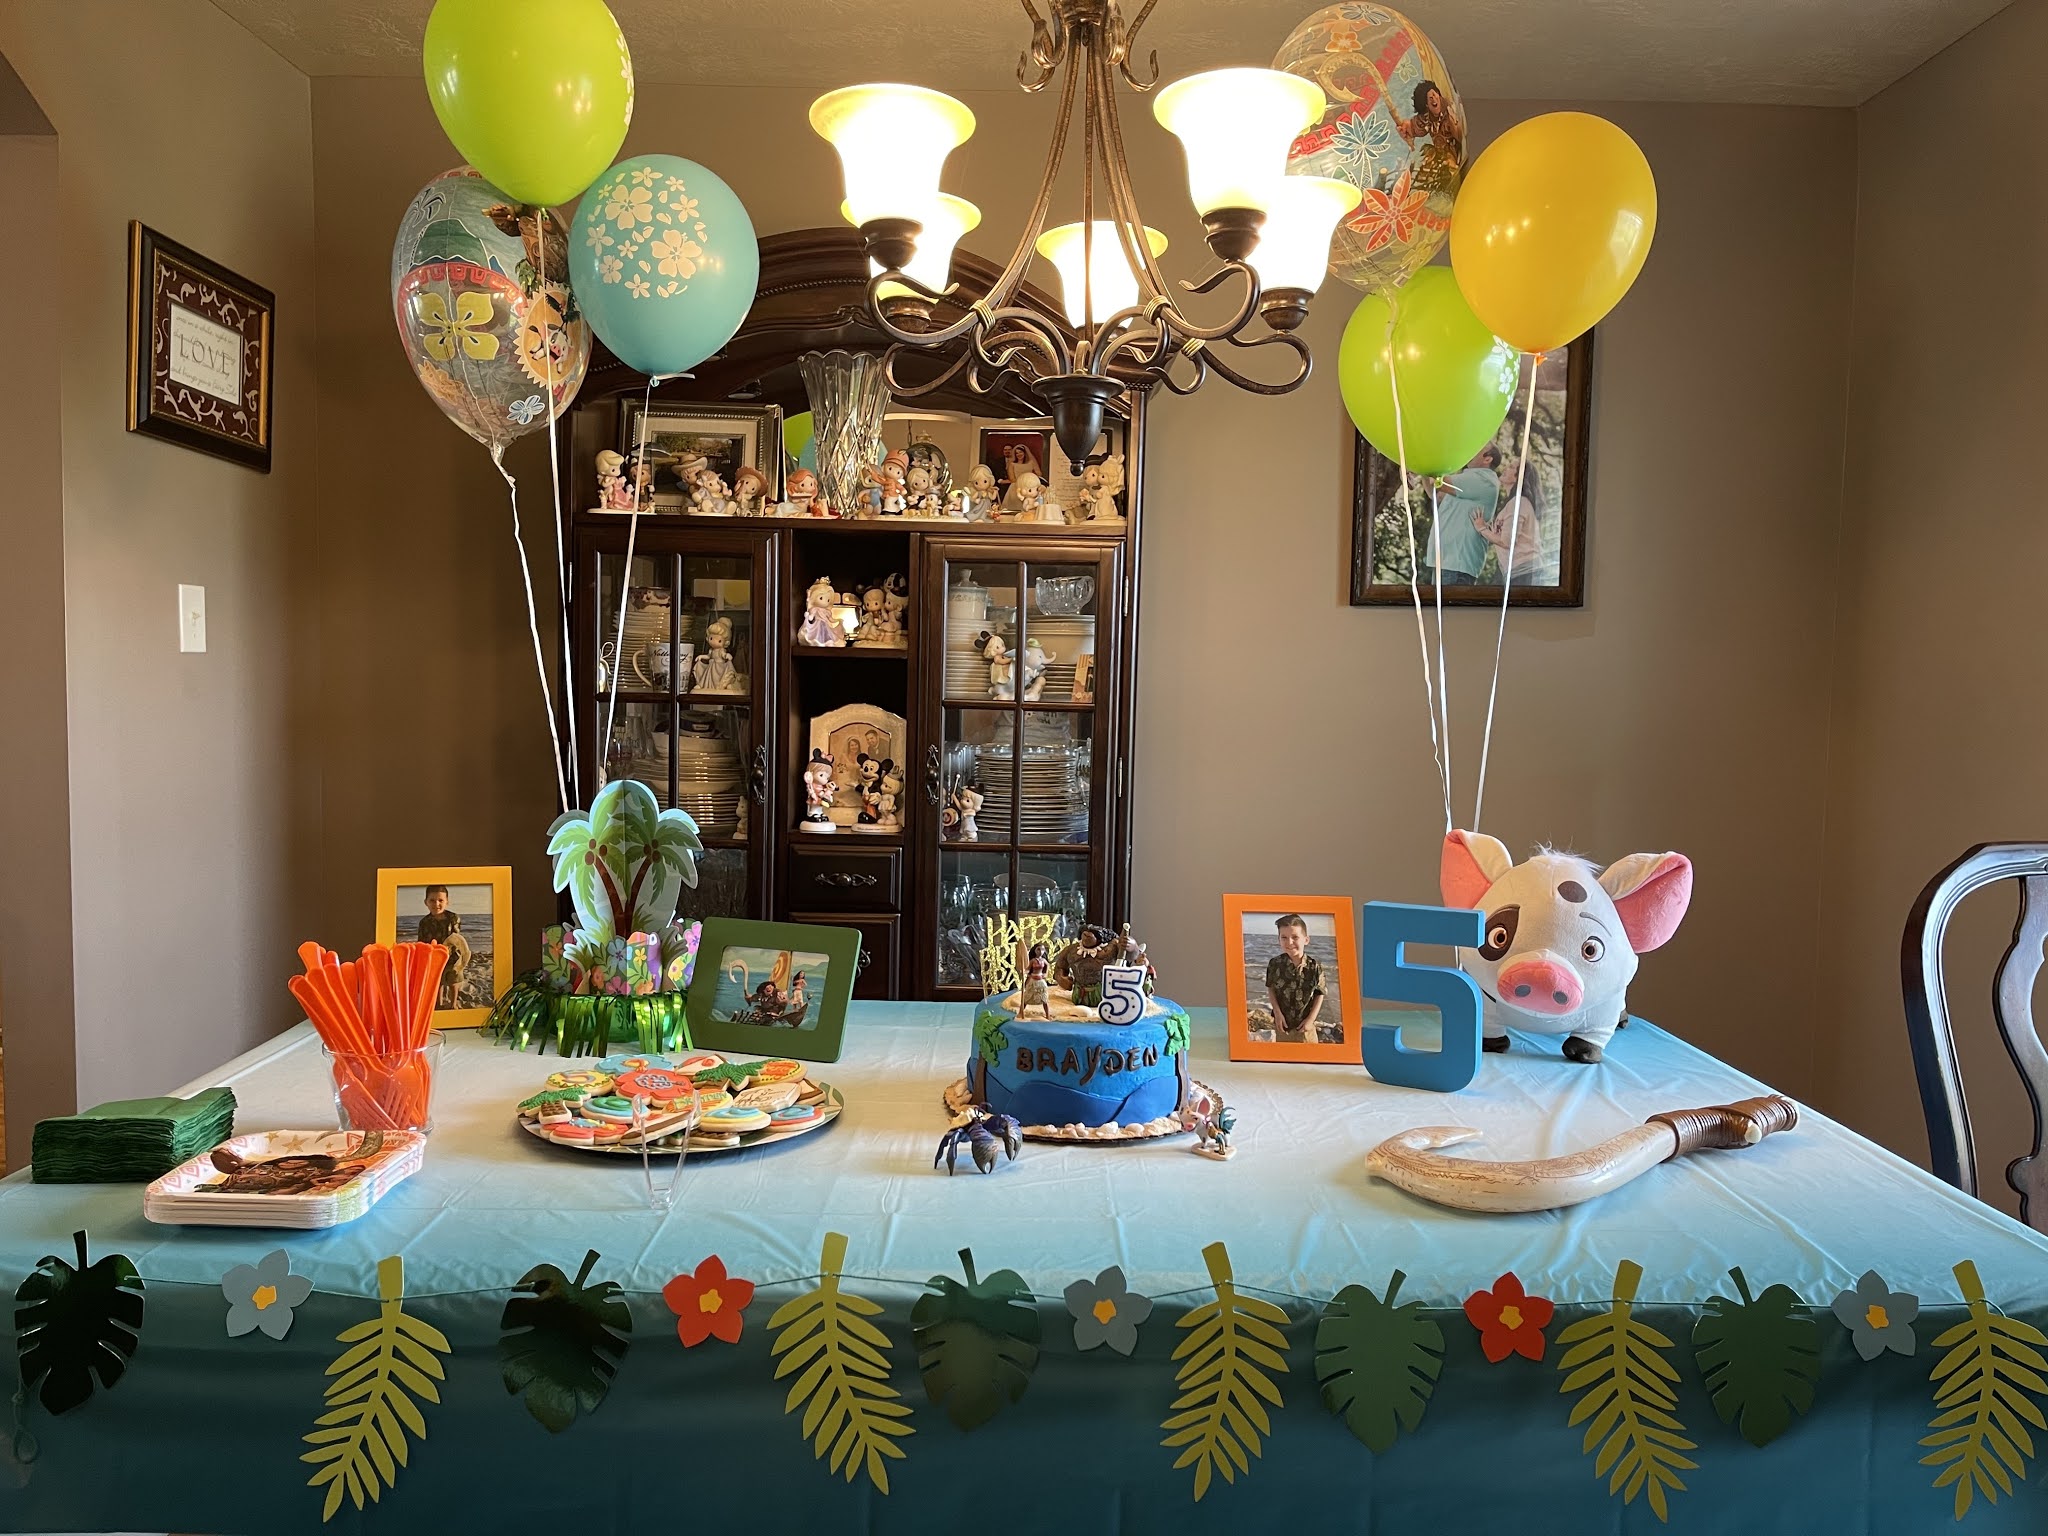 Just Me and My Running Shoes: 5th Birthday Party - Maui Themed (From  Moana)